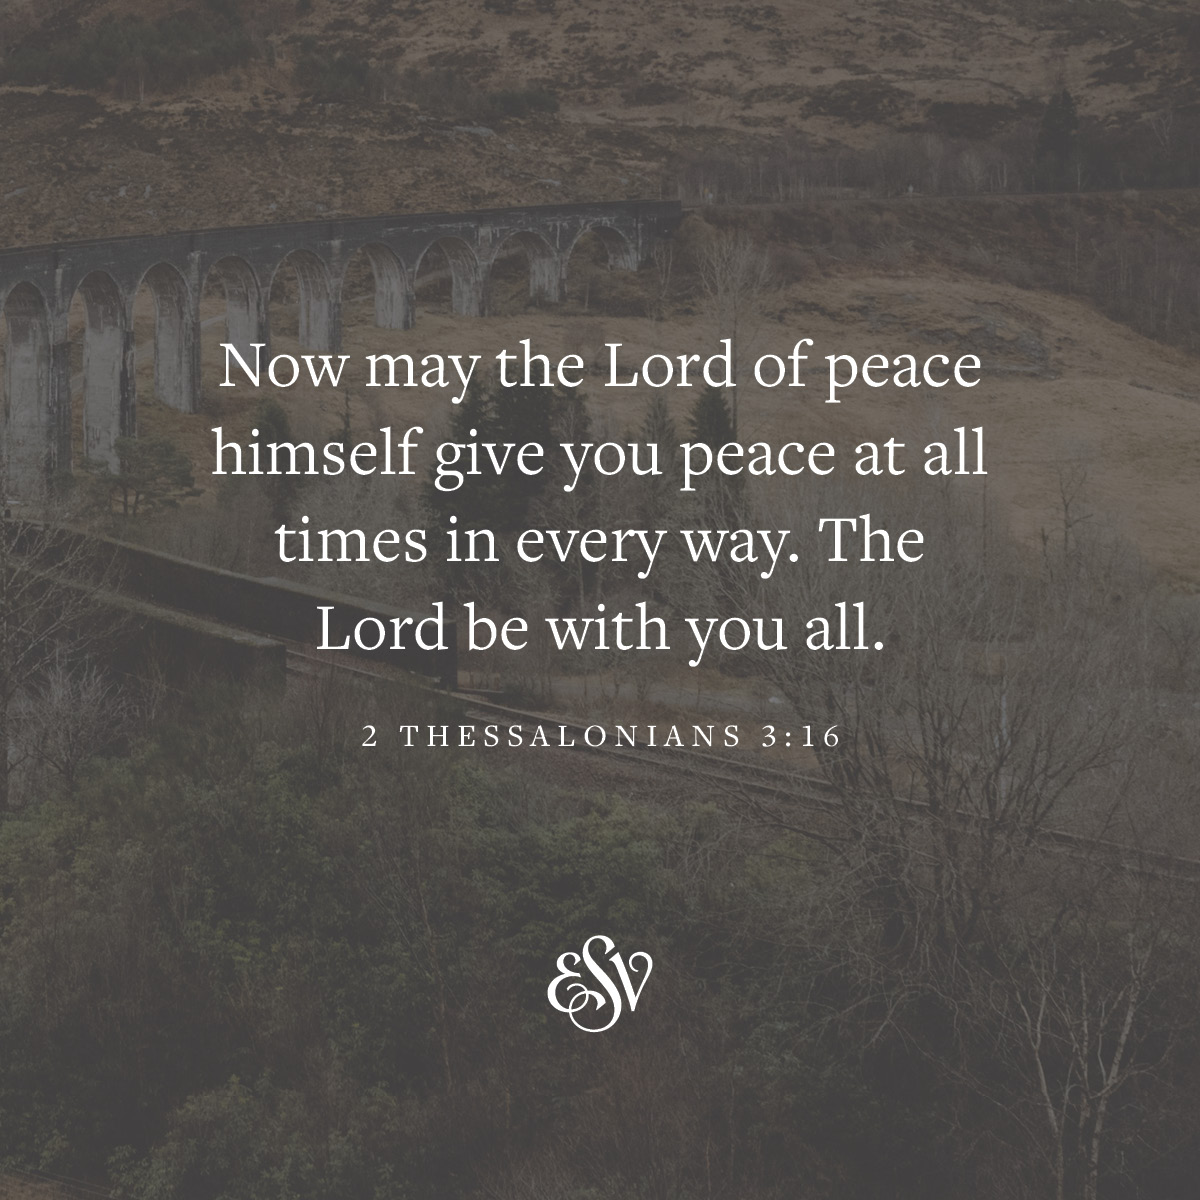 Now may the Lord of peace himself give you peace at all times in every way. The Lord be with you all. 
—2 Thessalonians 3:16 ESV.org

#Verseoftheday #ESV #Scripturememoryverse #Bible